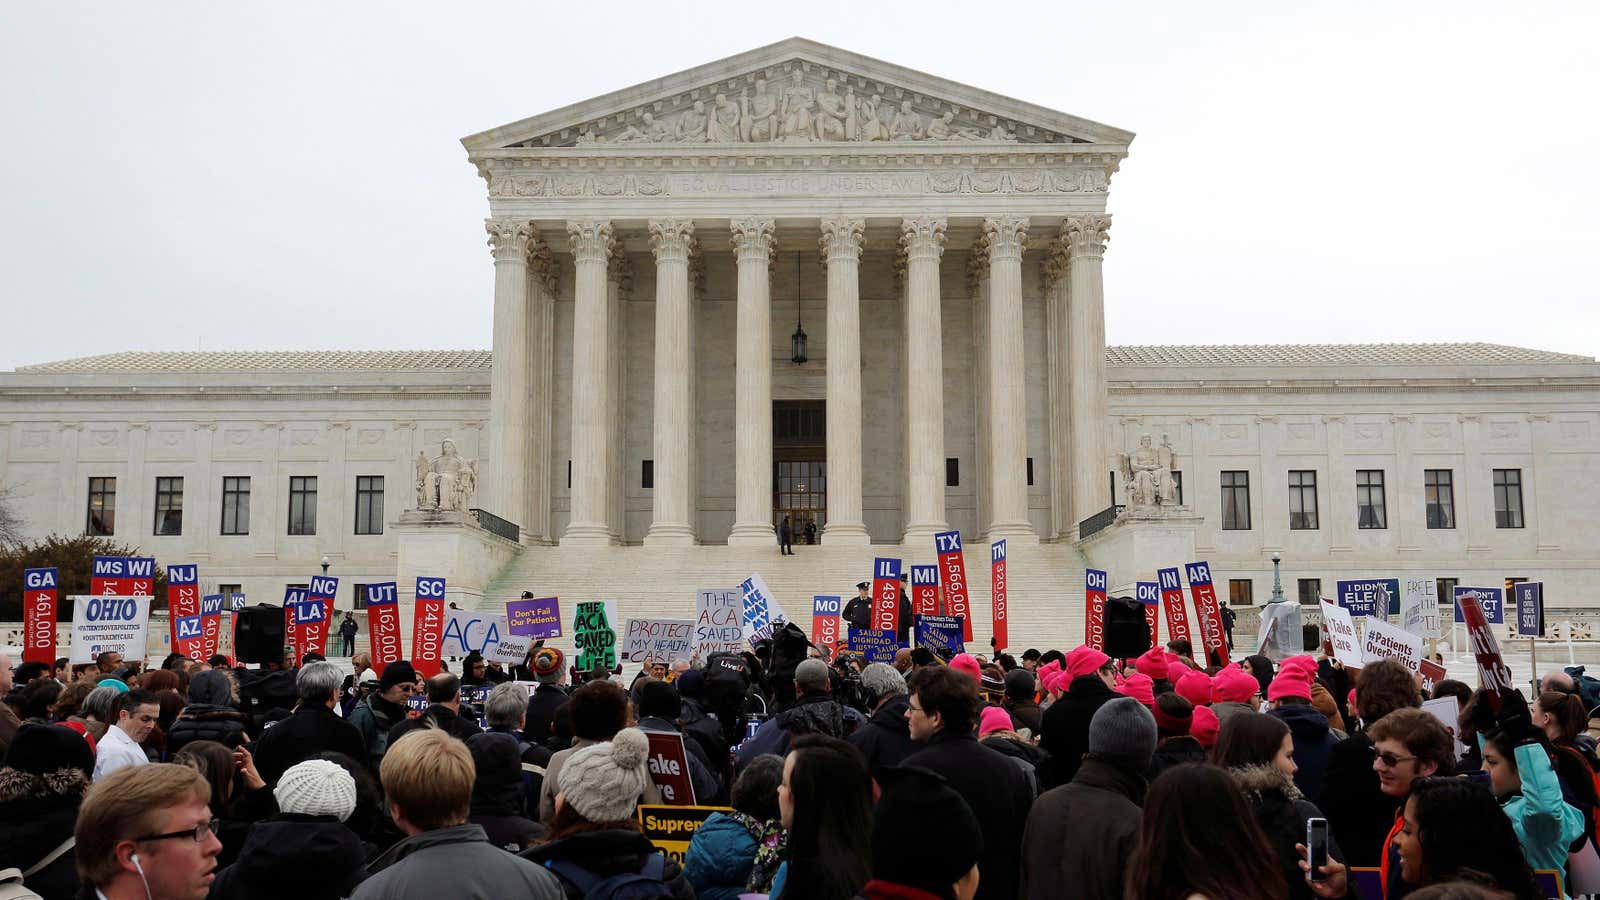 Obamacare supporters turn to the high court for help.